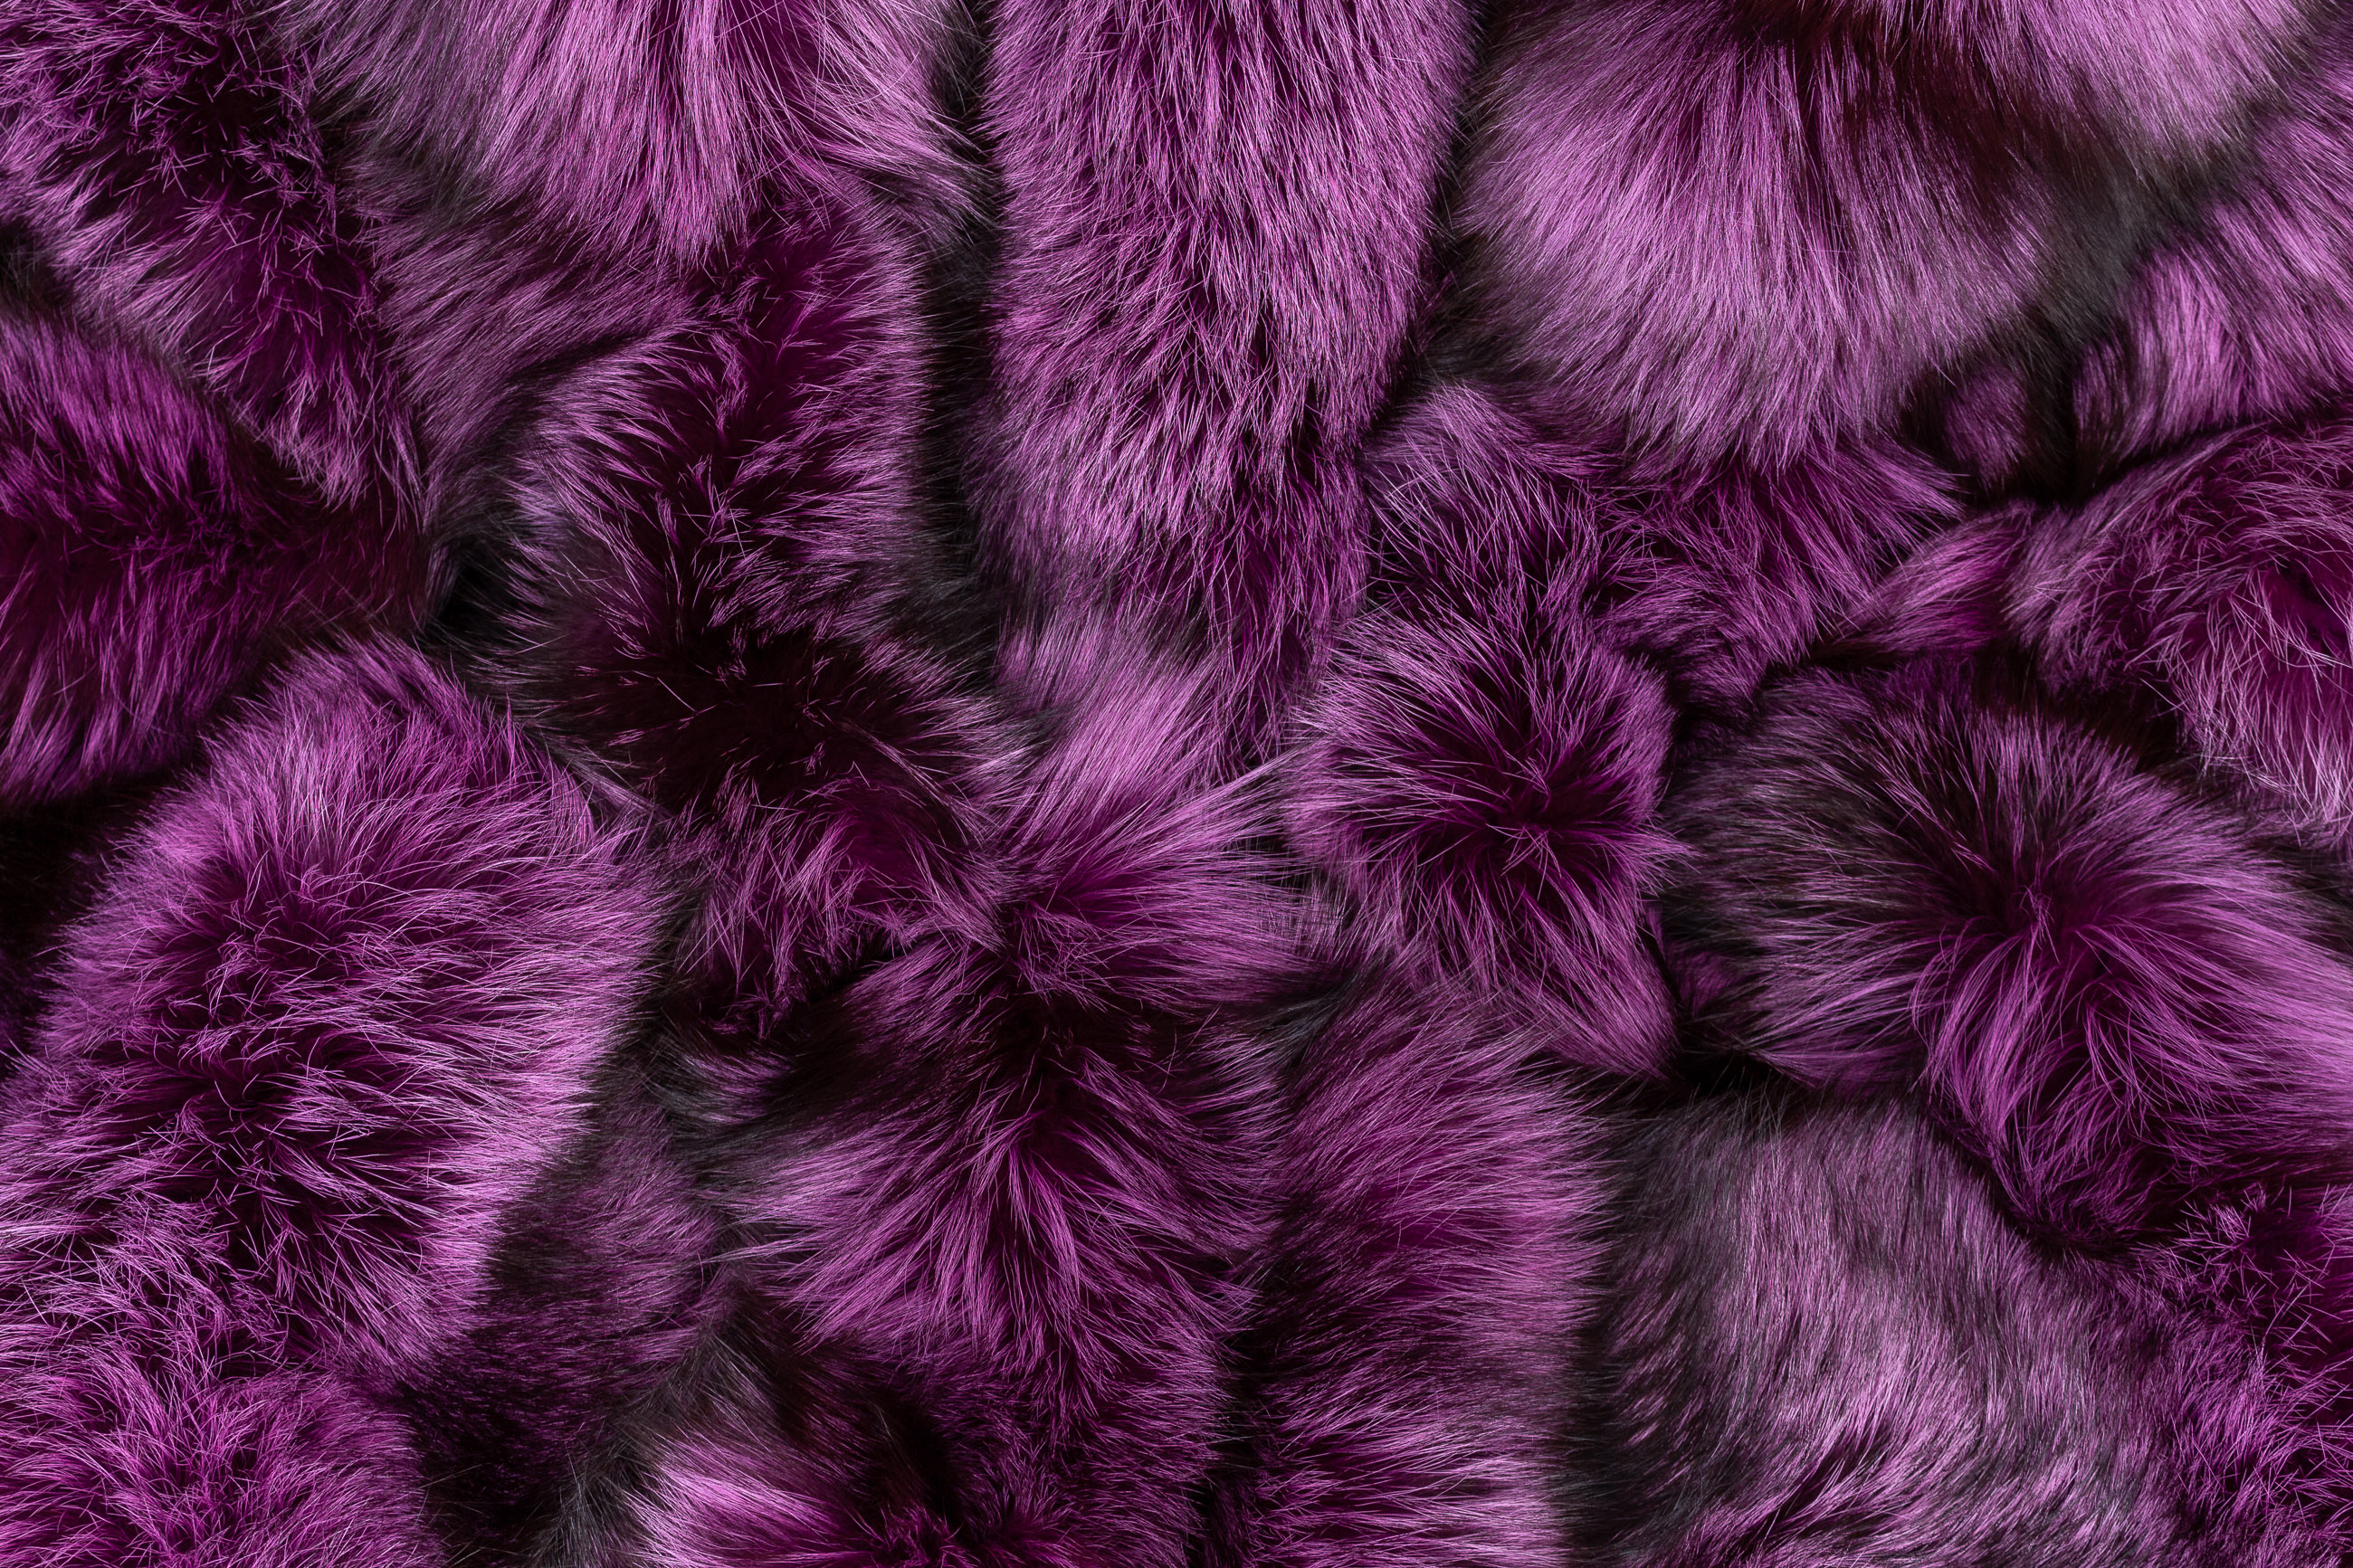 Real Fur Blanket made with Silver Foxes in Purple